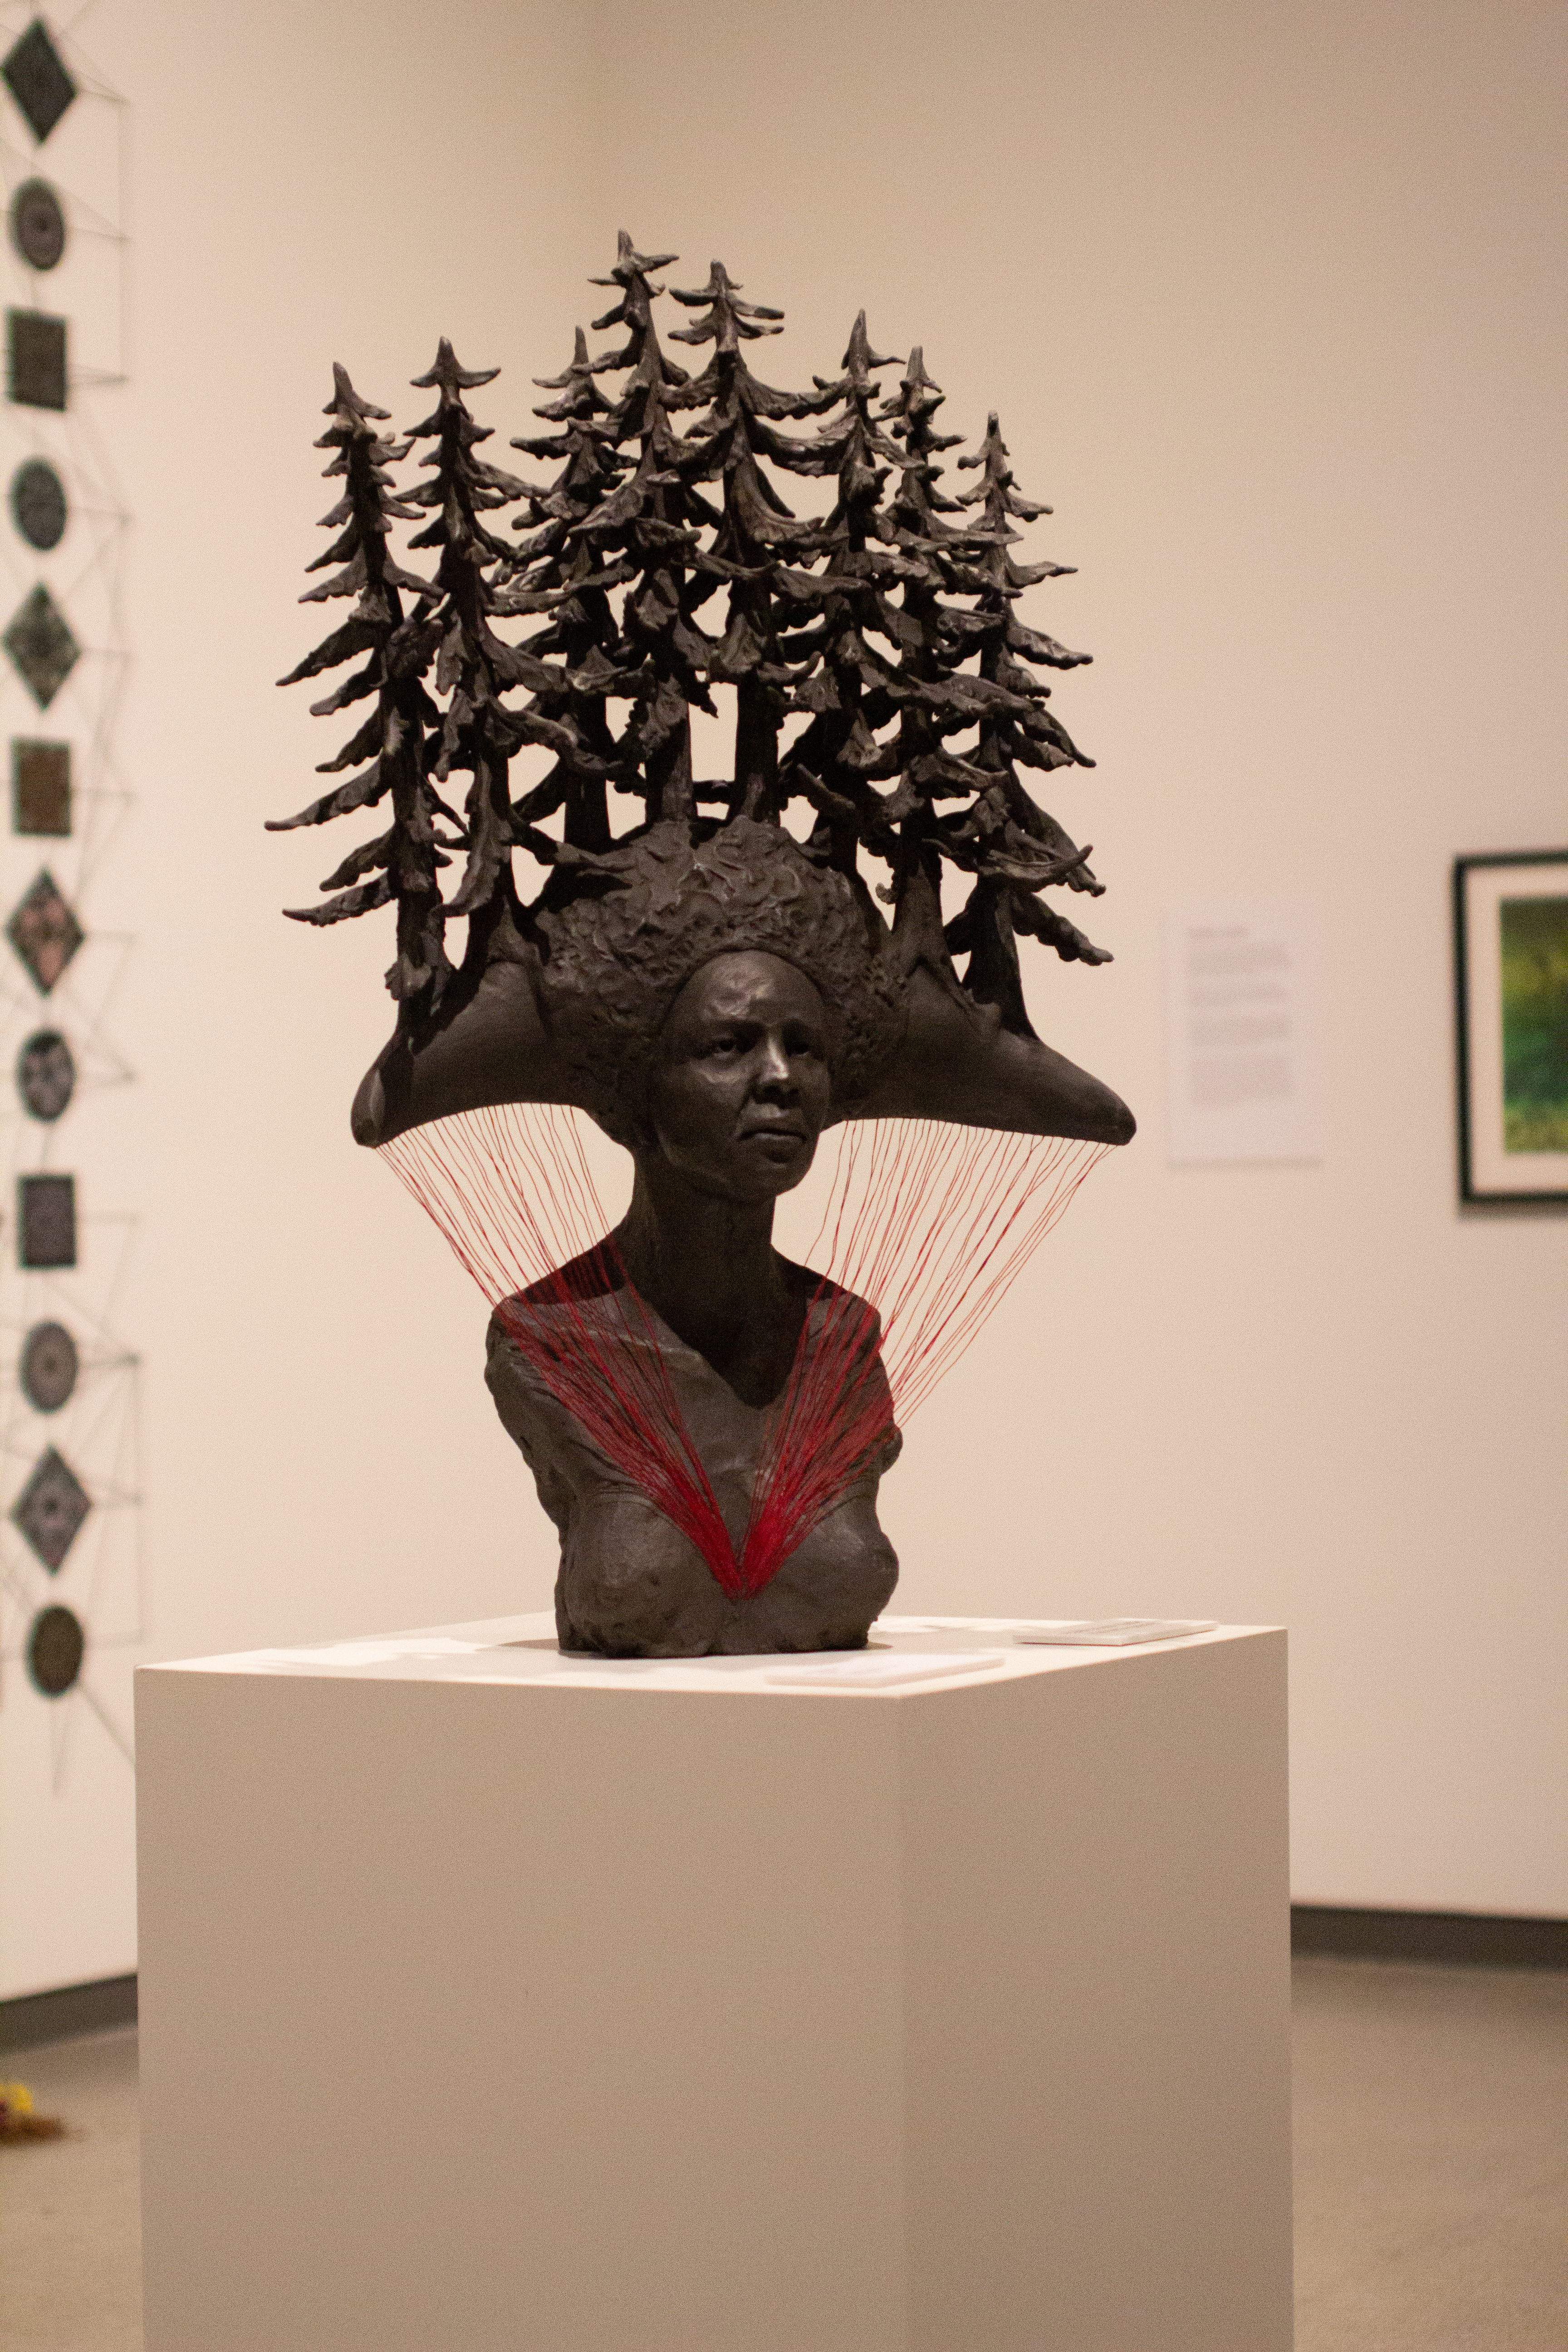 Aisha Harrison’s sculpture, “Ancestor I” is displayed at the Jordan Schnitzer Museum of Art on the Washington State University Campus.